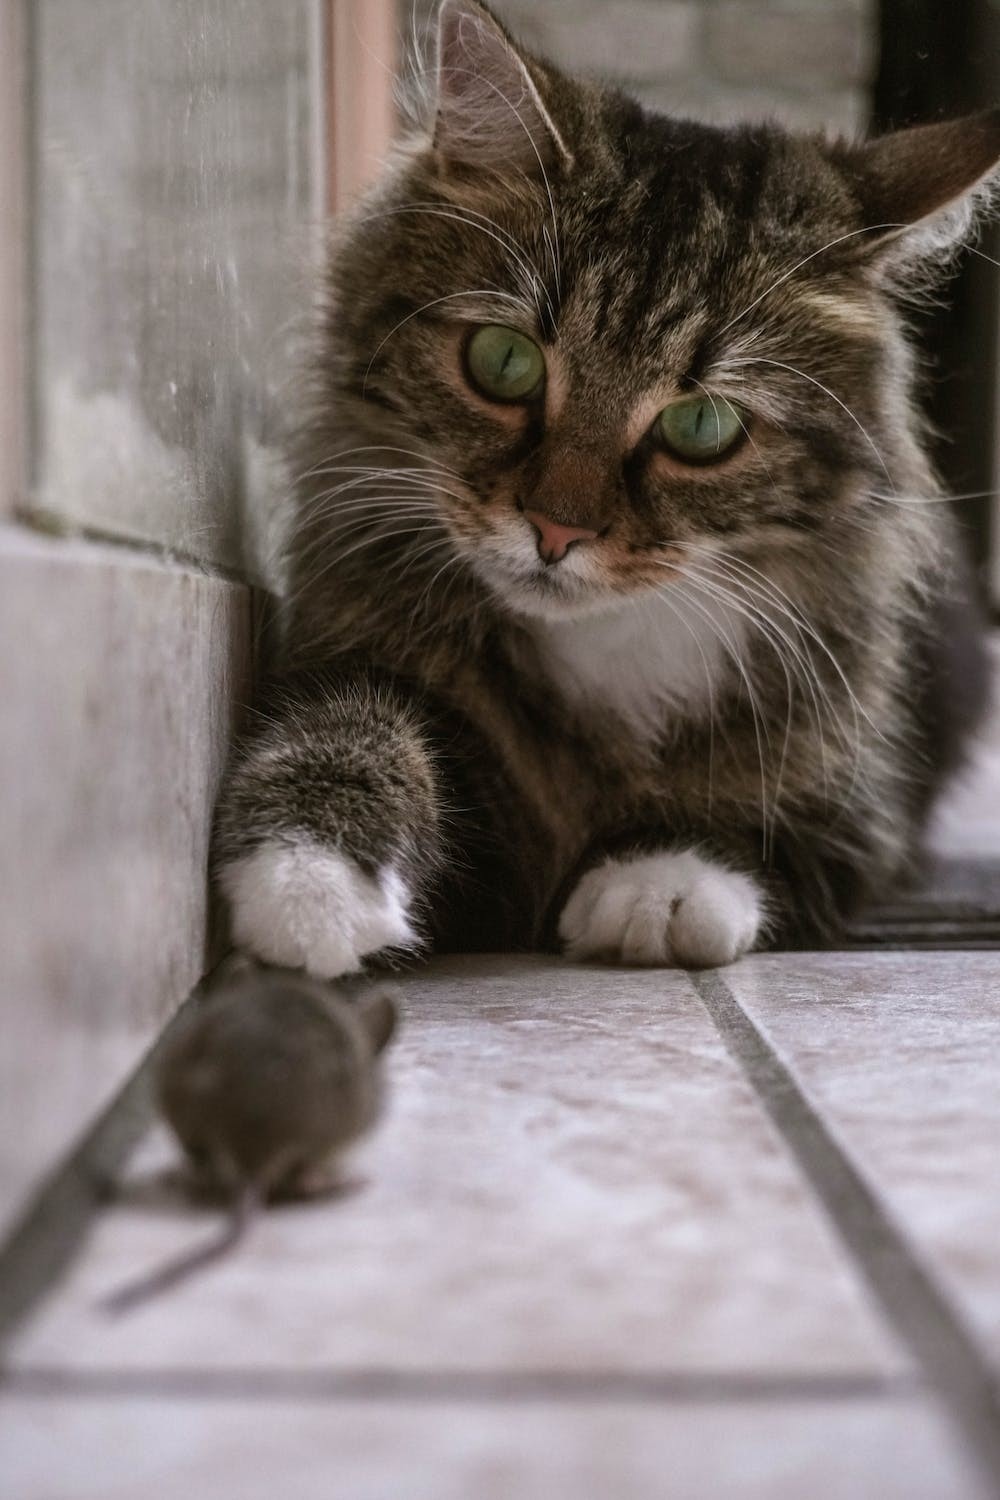 Fluffy cat stalking a mouse in his house